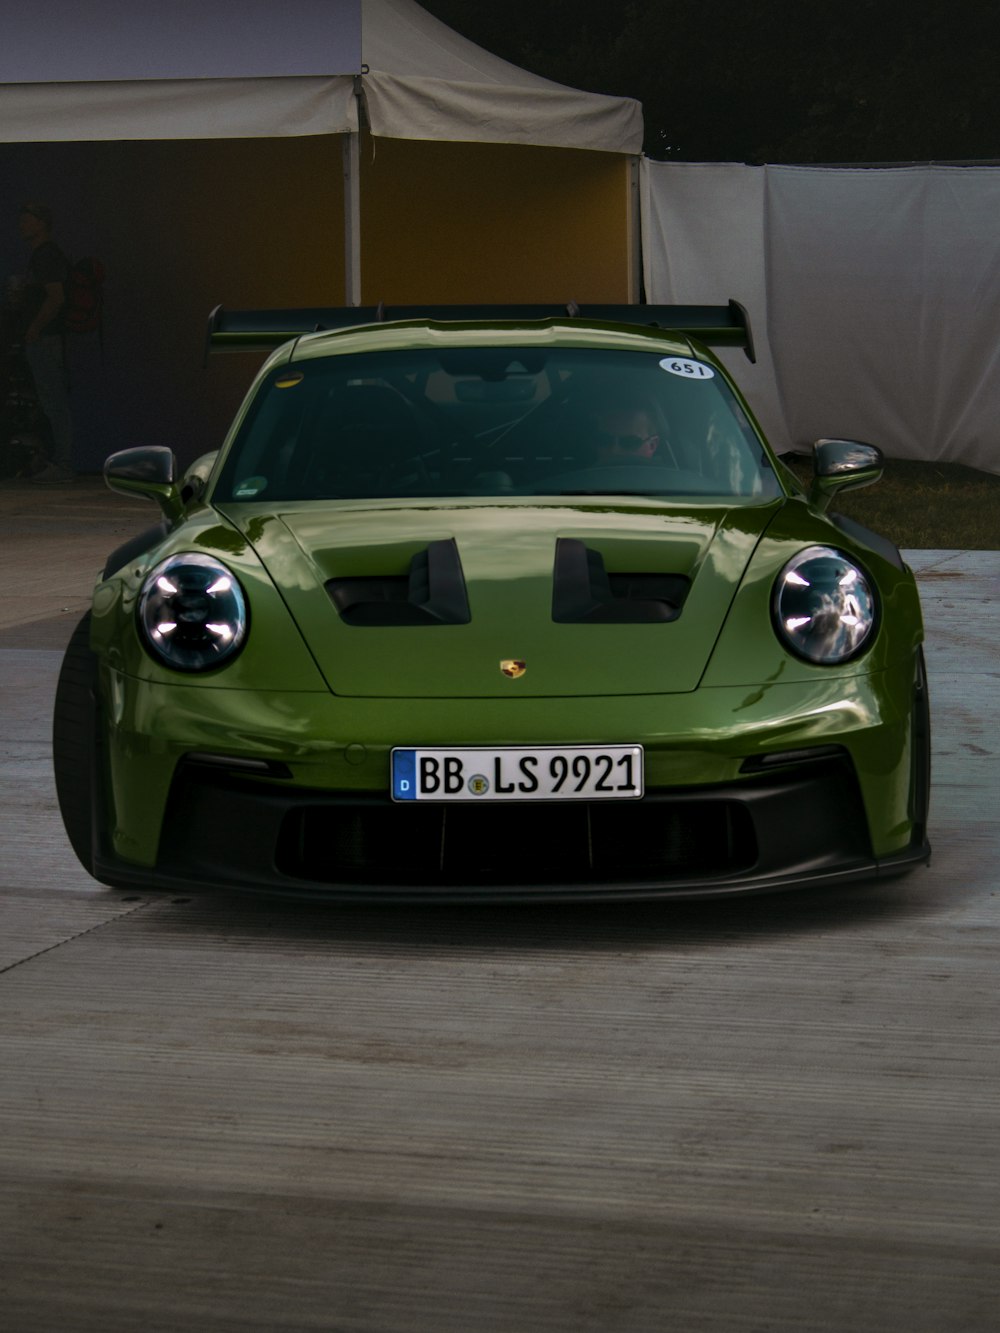 a green sports car parked in a parking lot